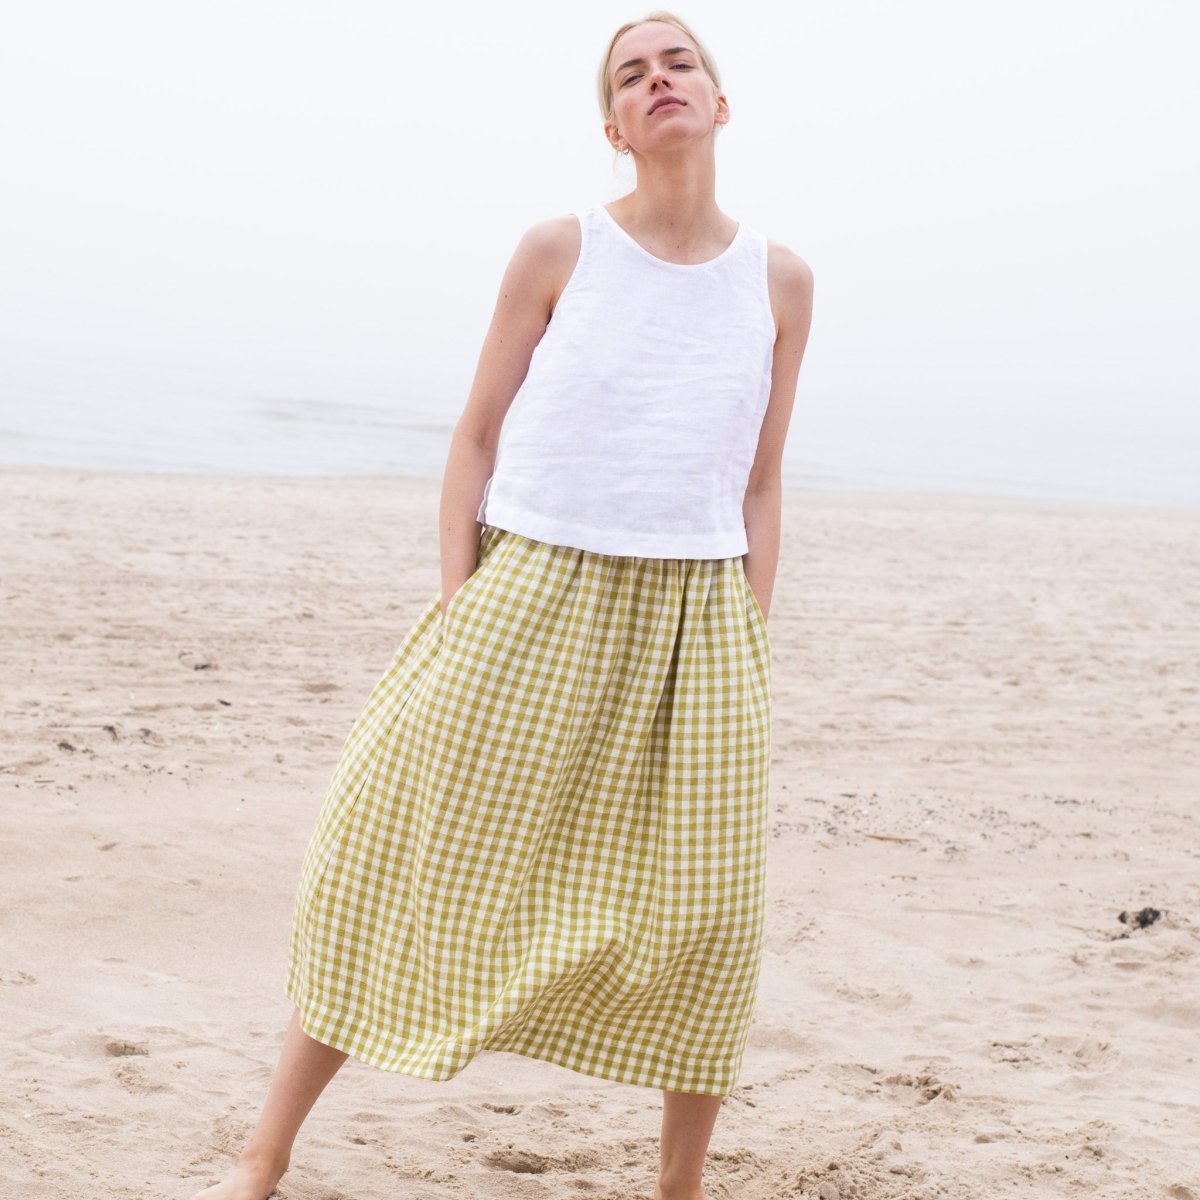 R: SION gathered linen skirt (Size: M; Color: Yellow/Natural) - notPERFECTLINEN